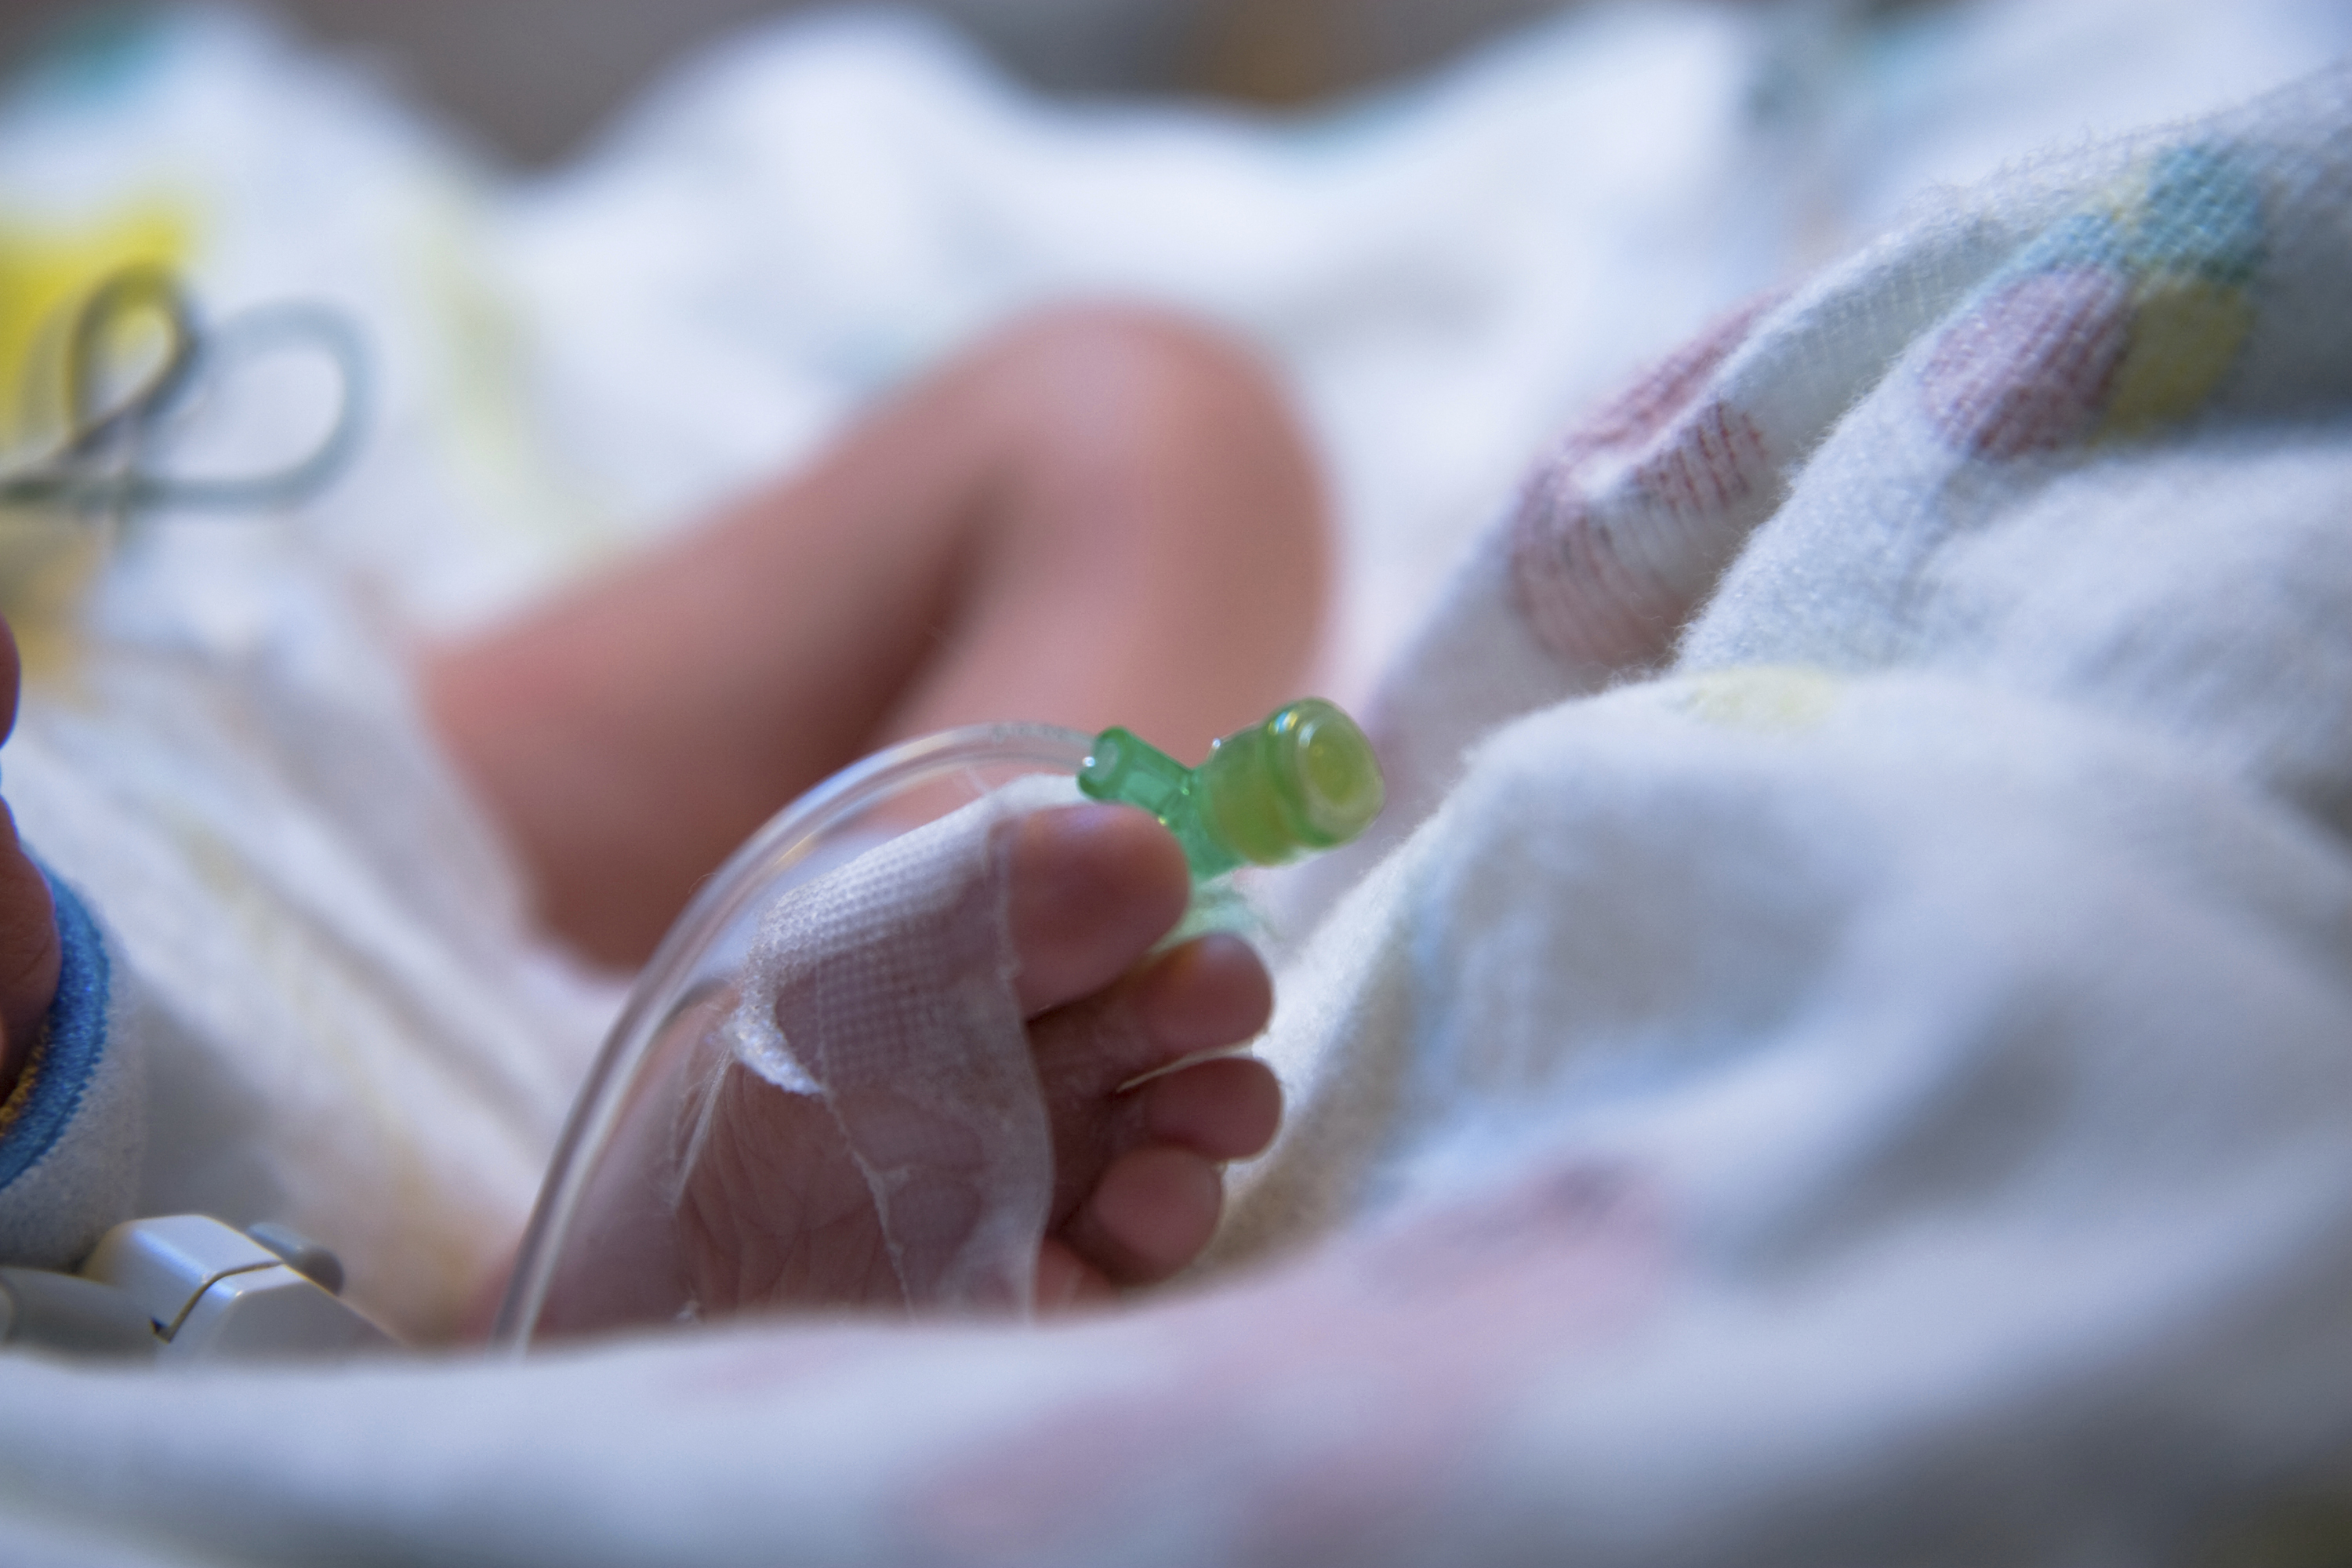 A premature baby undergoing medical procedures in the hospital (iStock Photo)